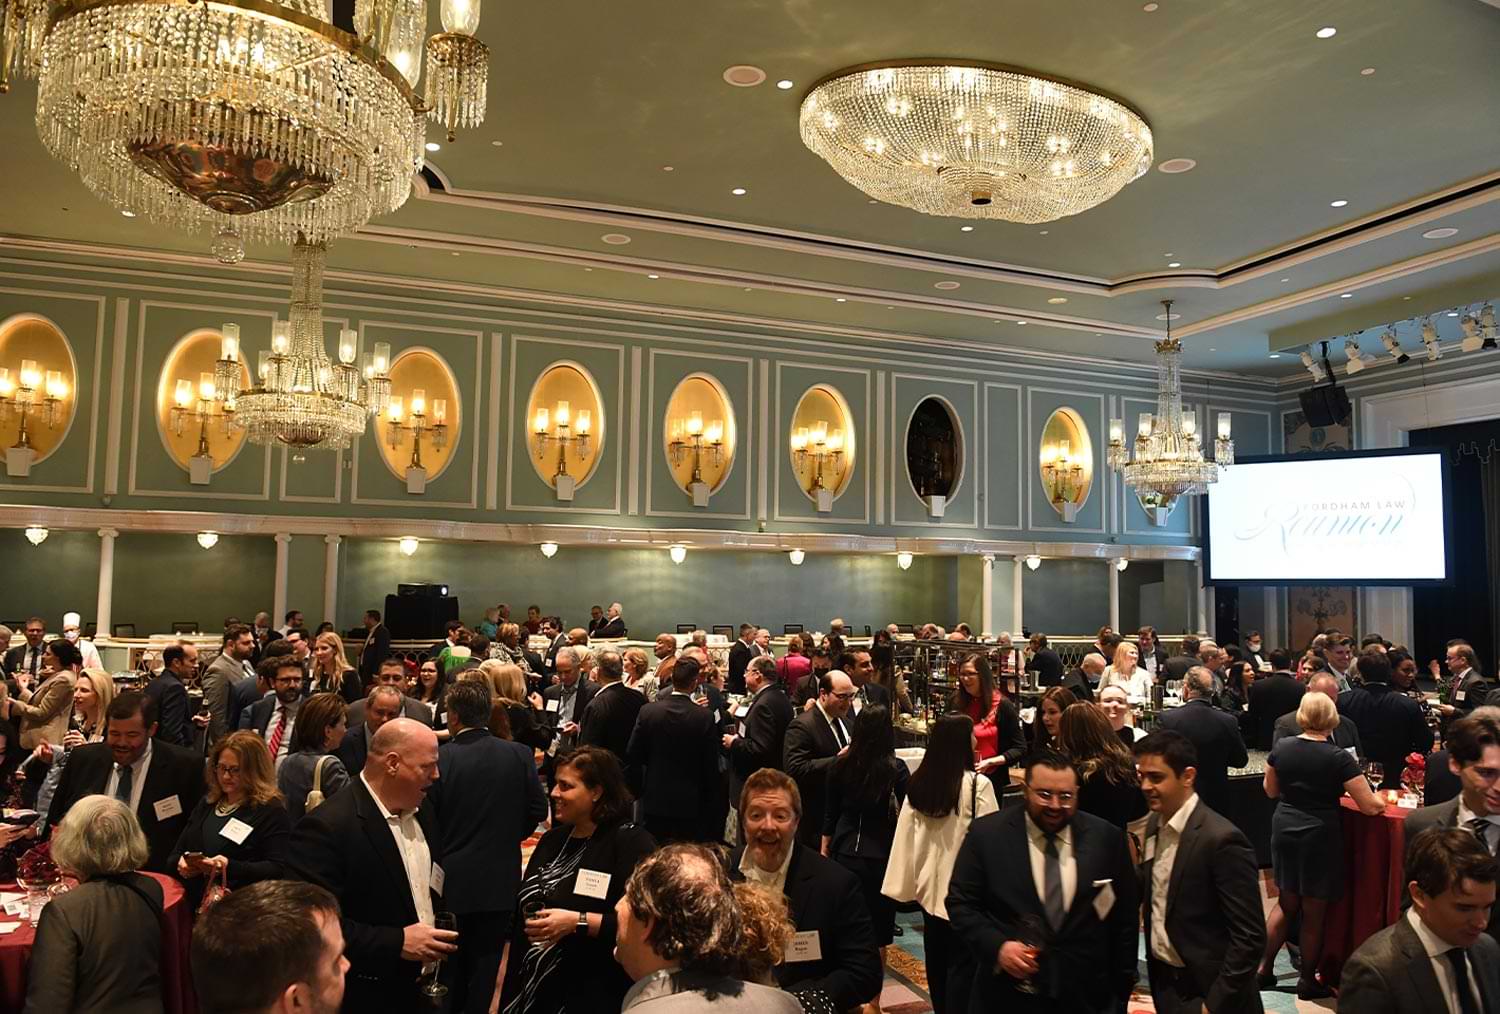 wide view of a large banquet room full of alumni and event attendees